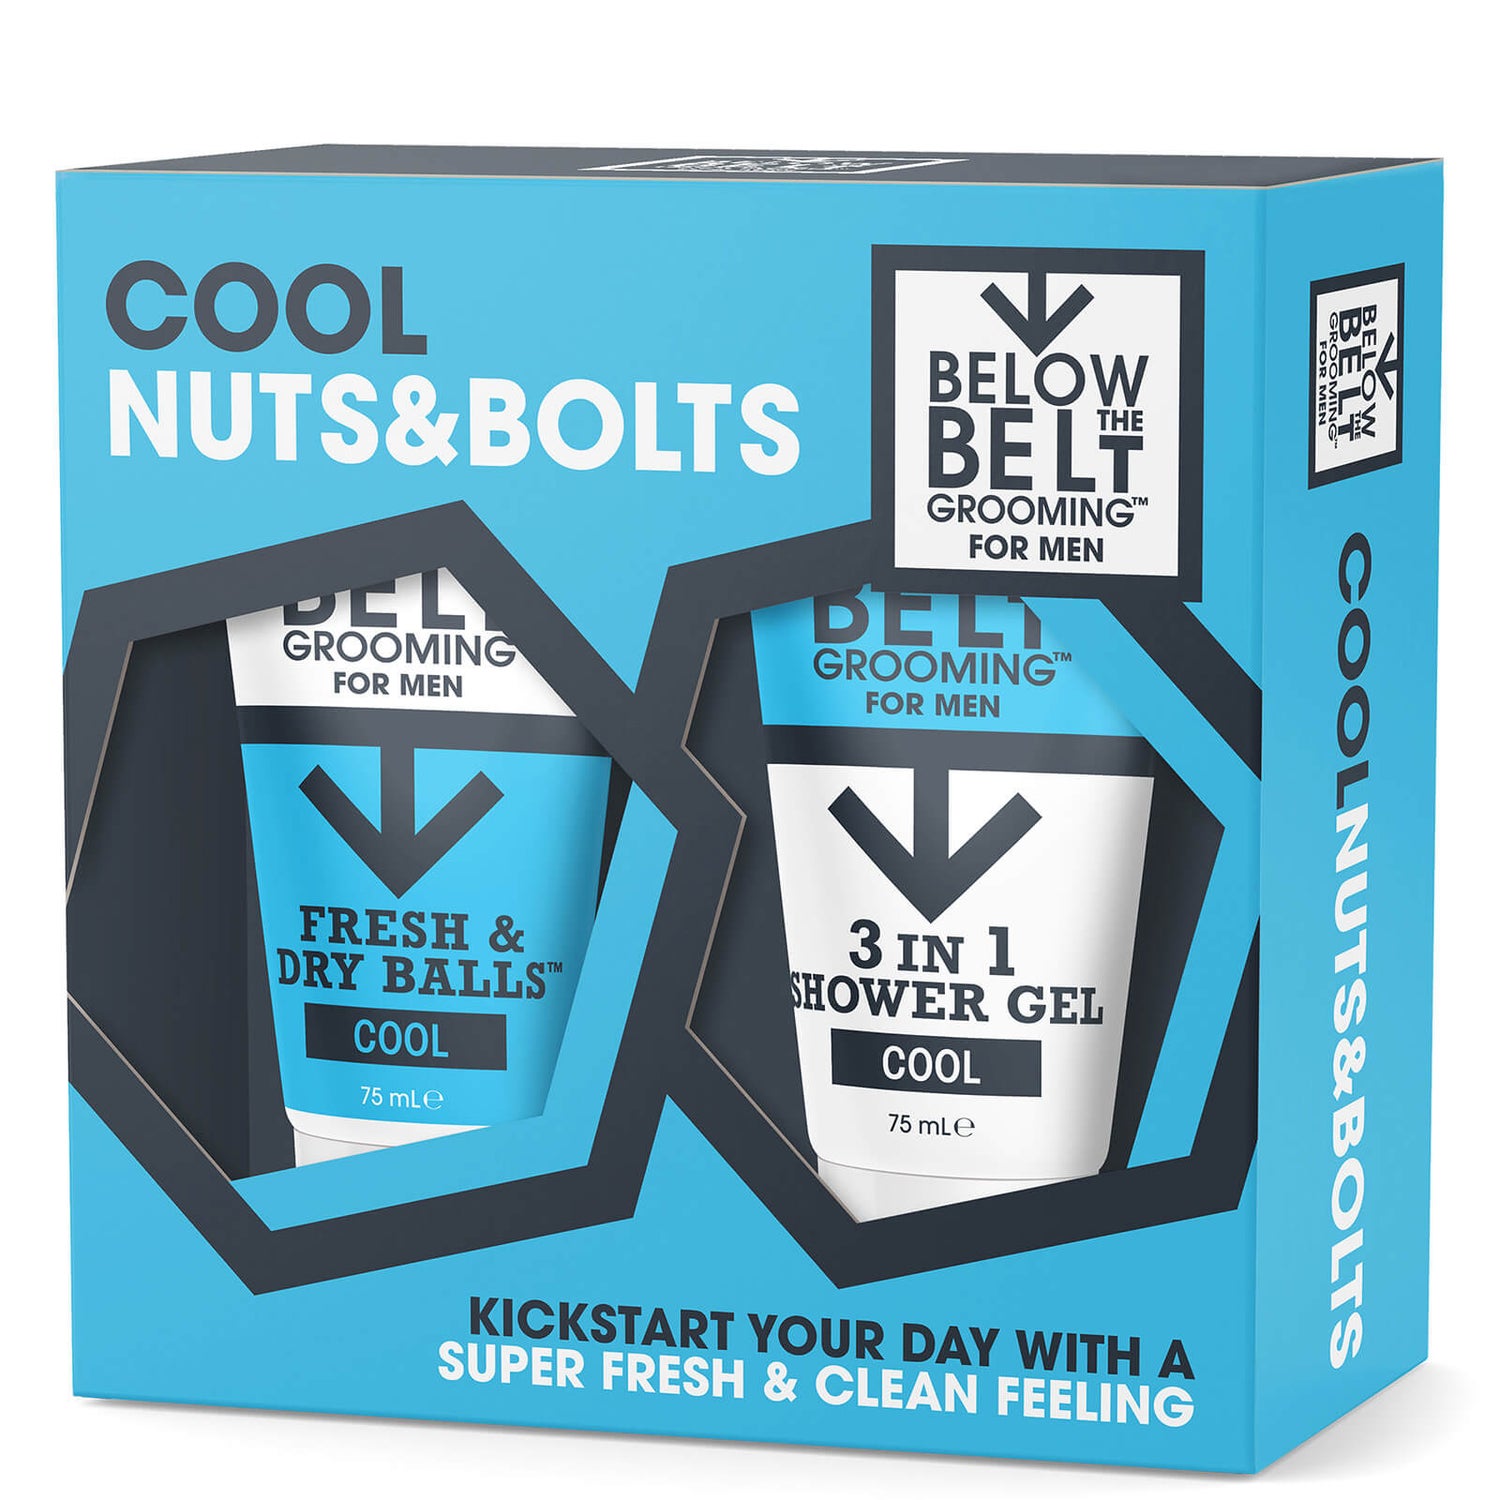 Below the Belt Grooming Cool Nuts and Bolts